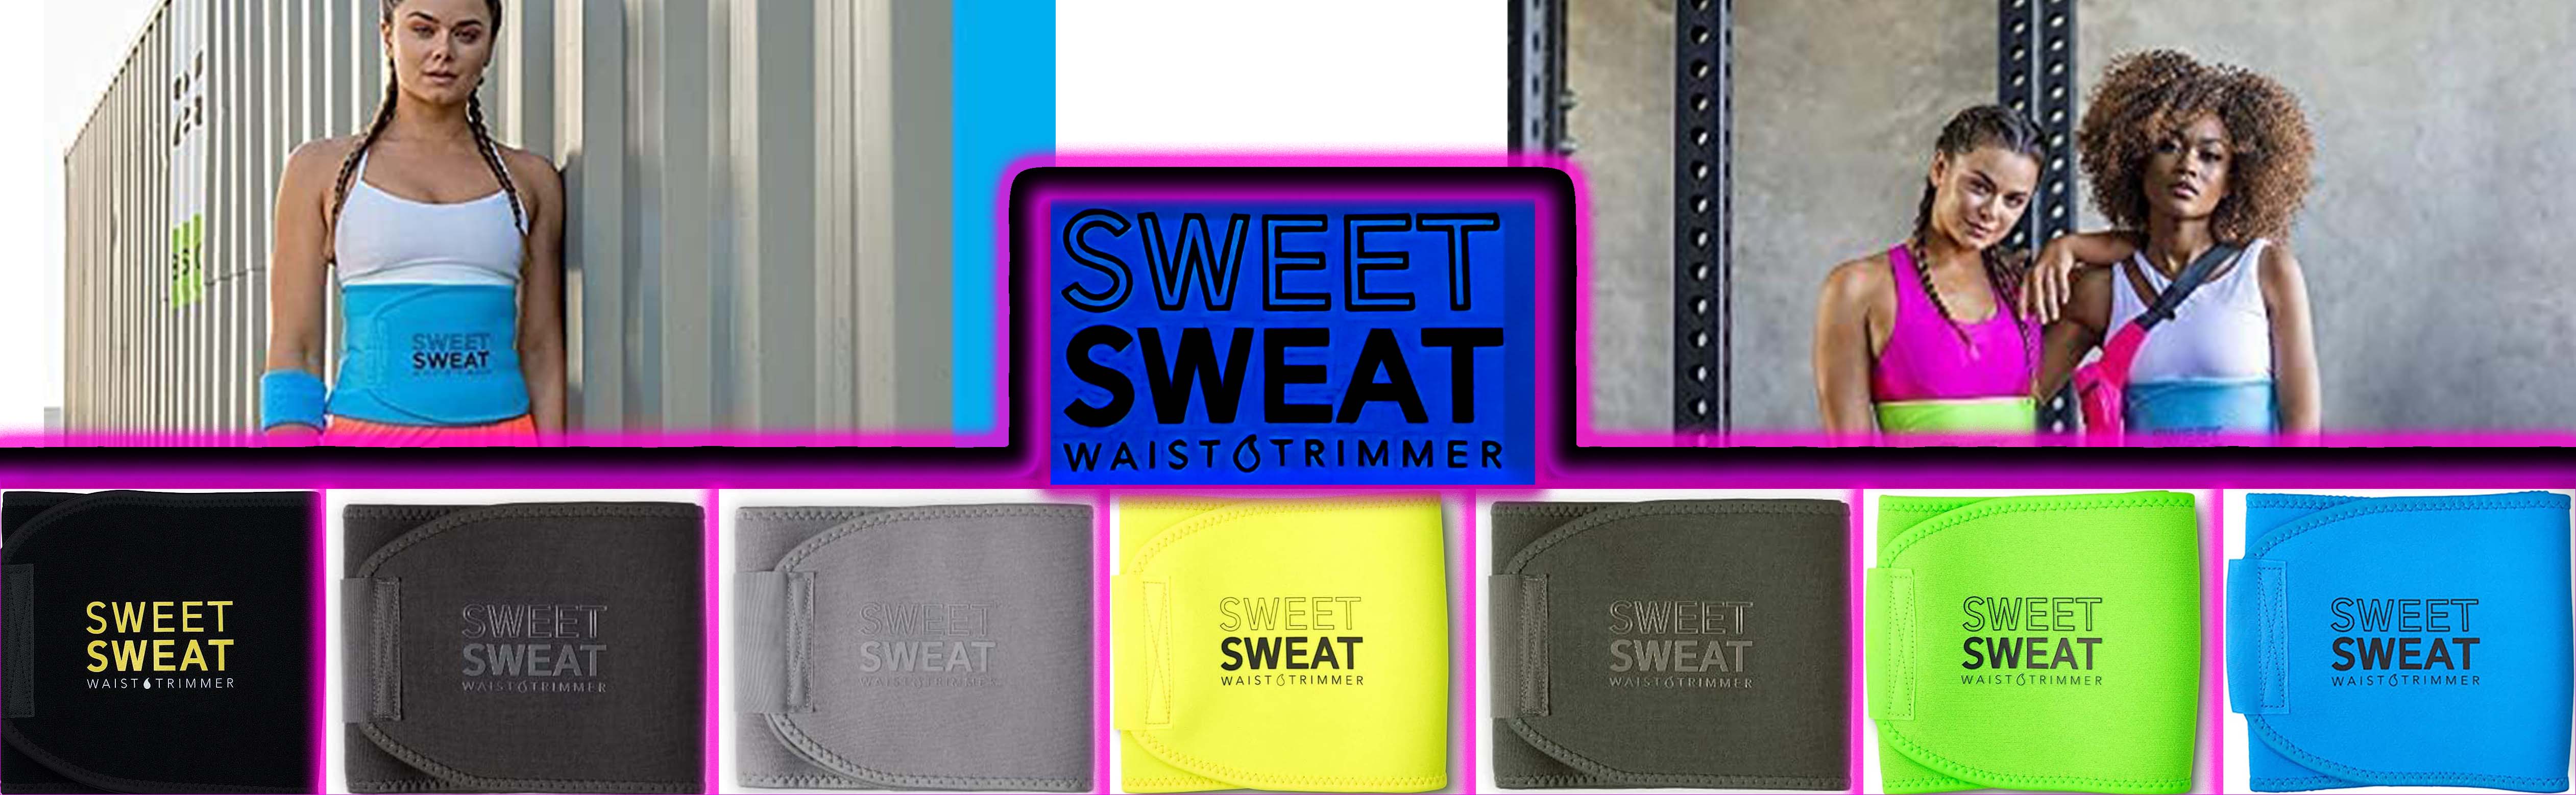 Do Waist Trimmer Sweat Belts work WITHOUT Exercise? LOOSE SKIN, Sweet Sweat